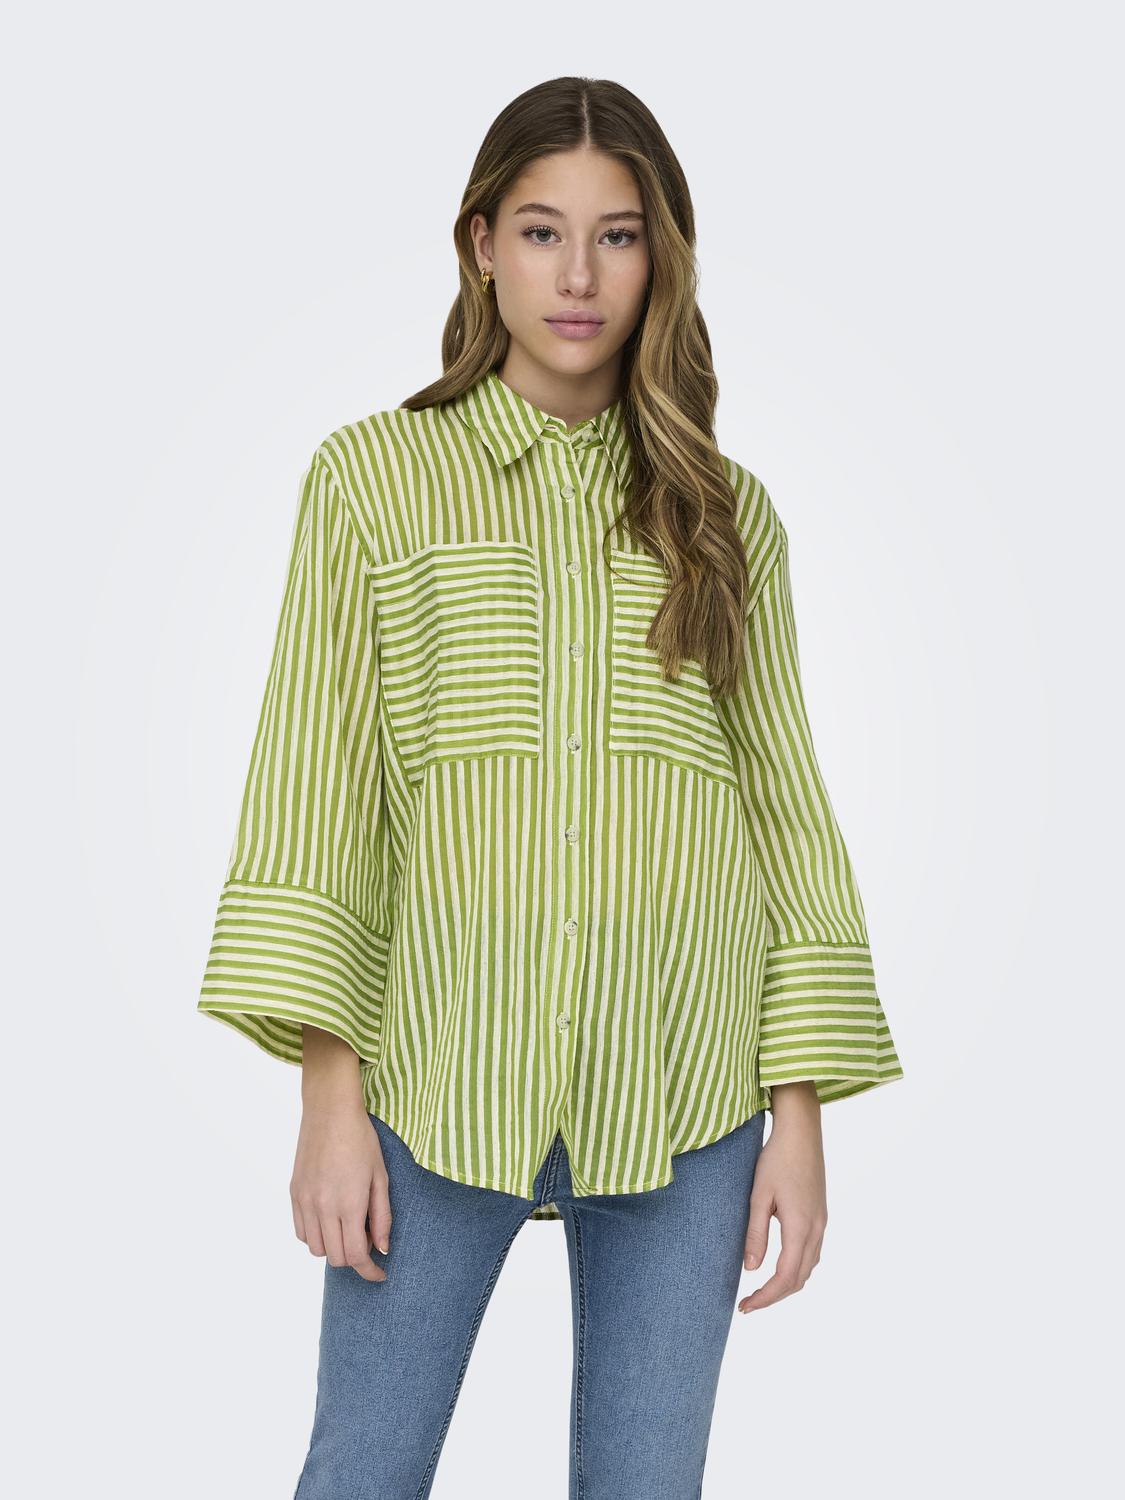 gallery-15124-for-15324978-lima bean green